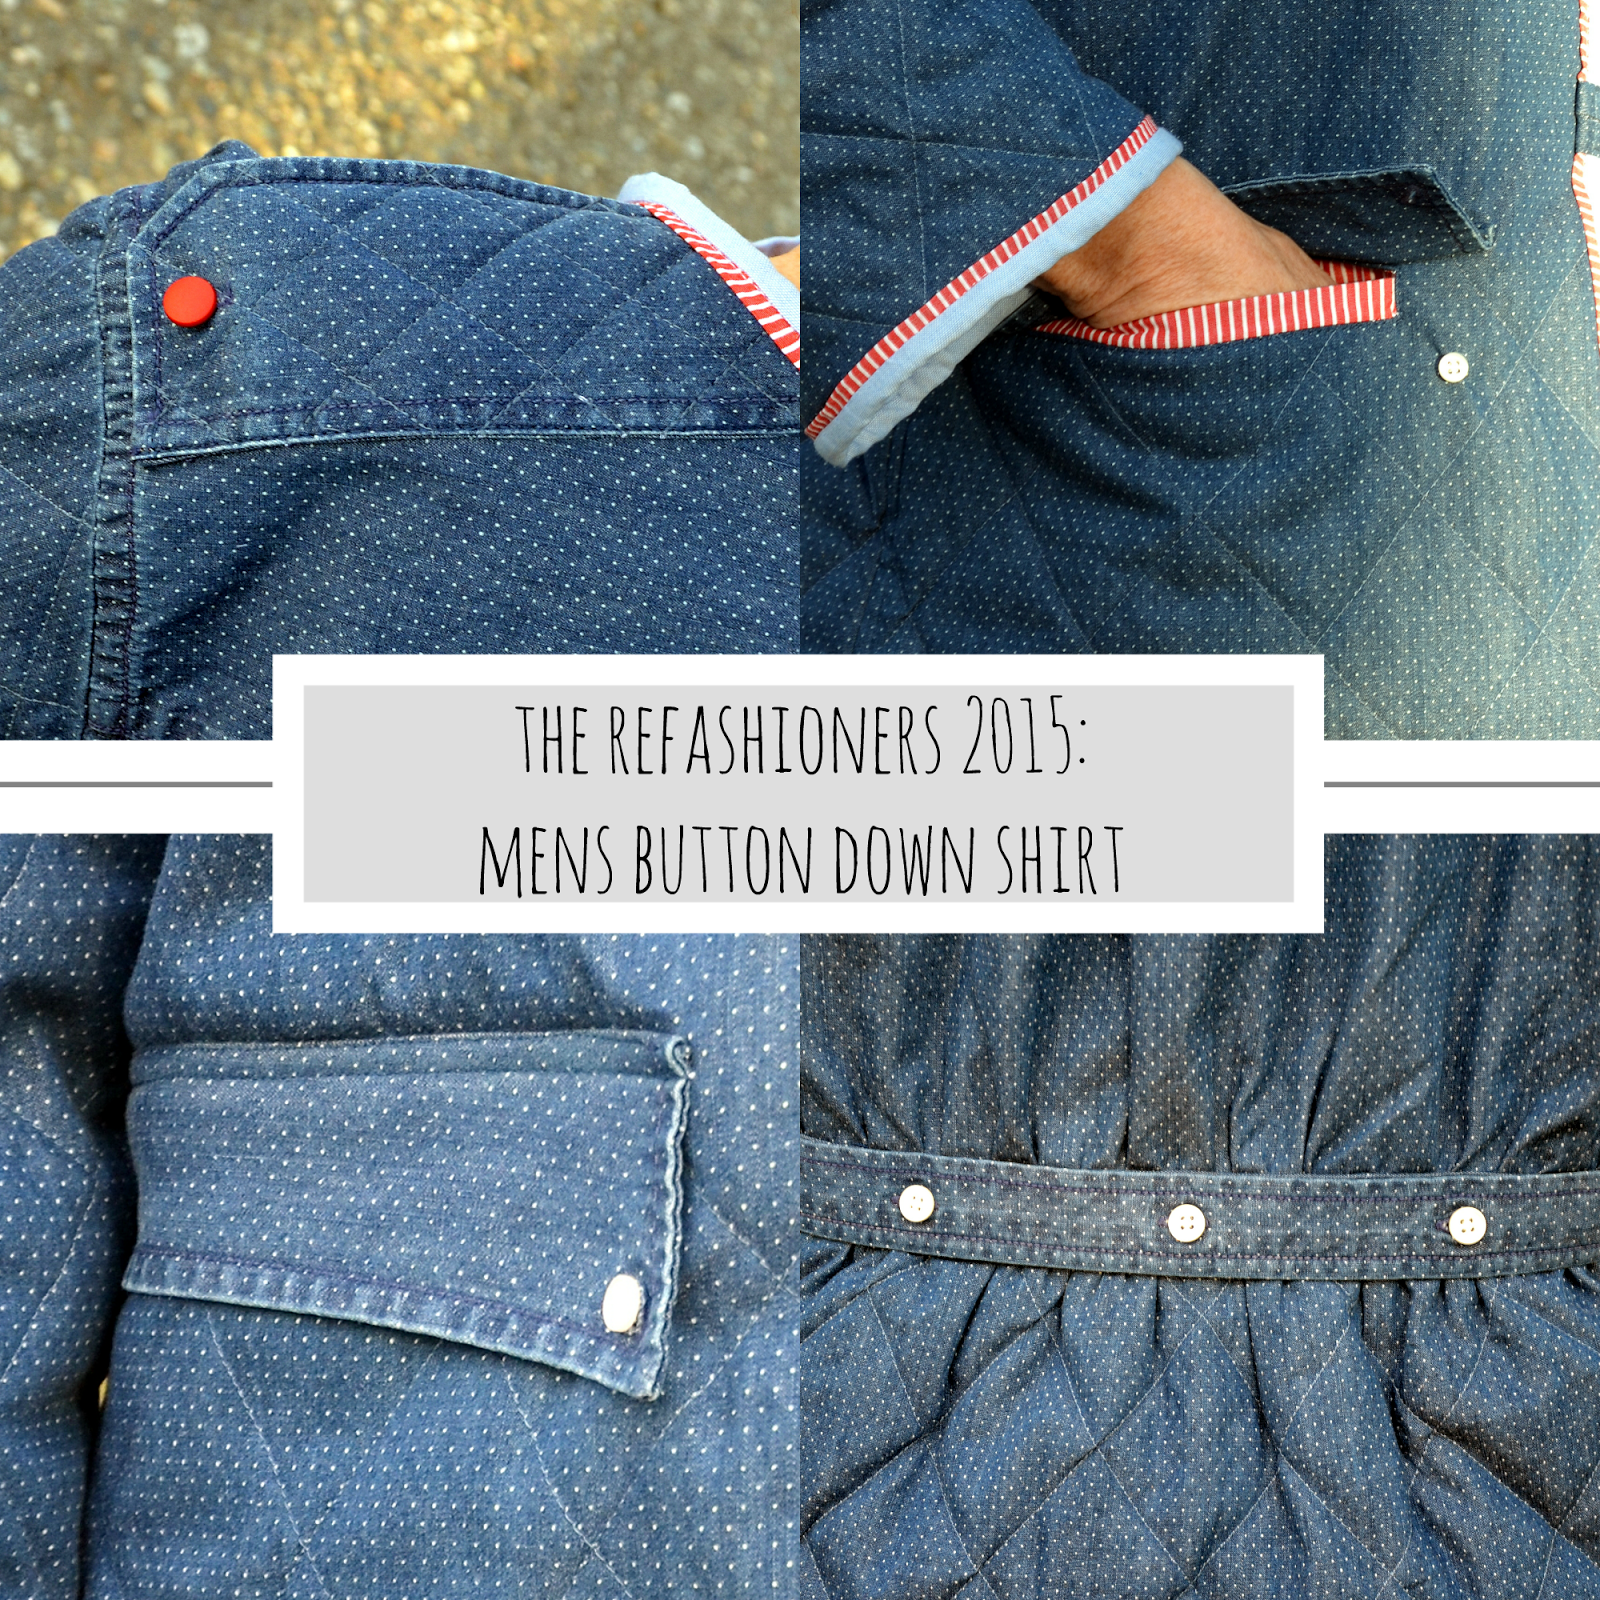 #get shirty, #therefashioners2015, A Colourful Canvas